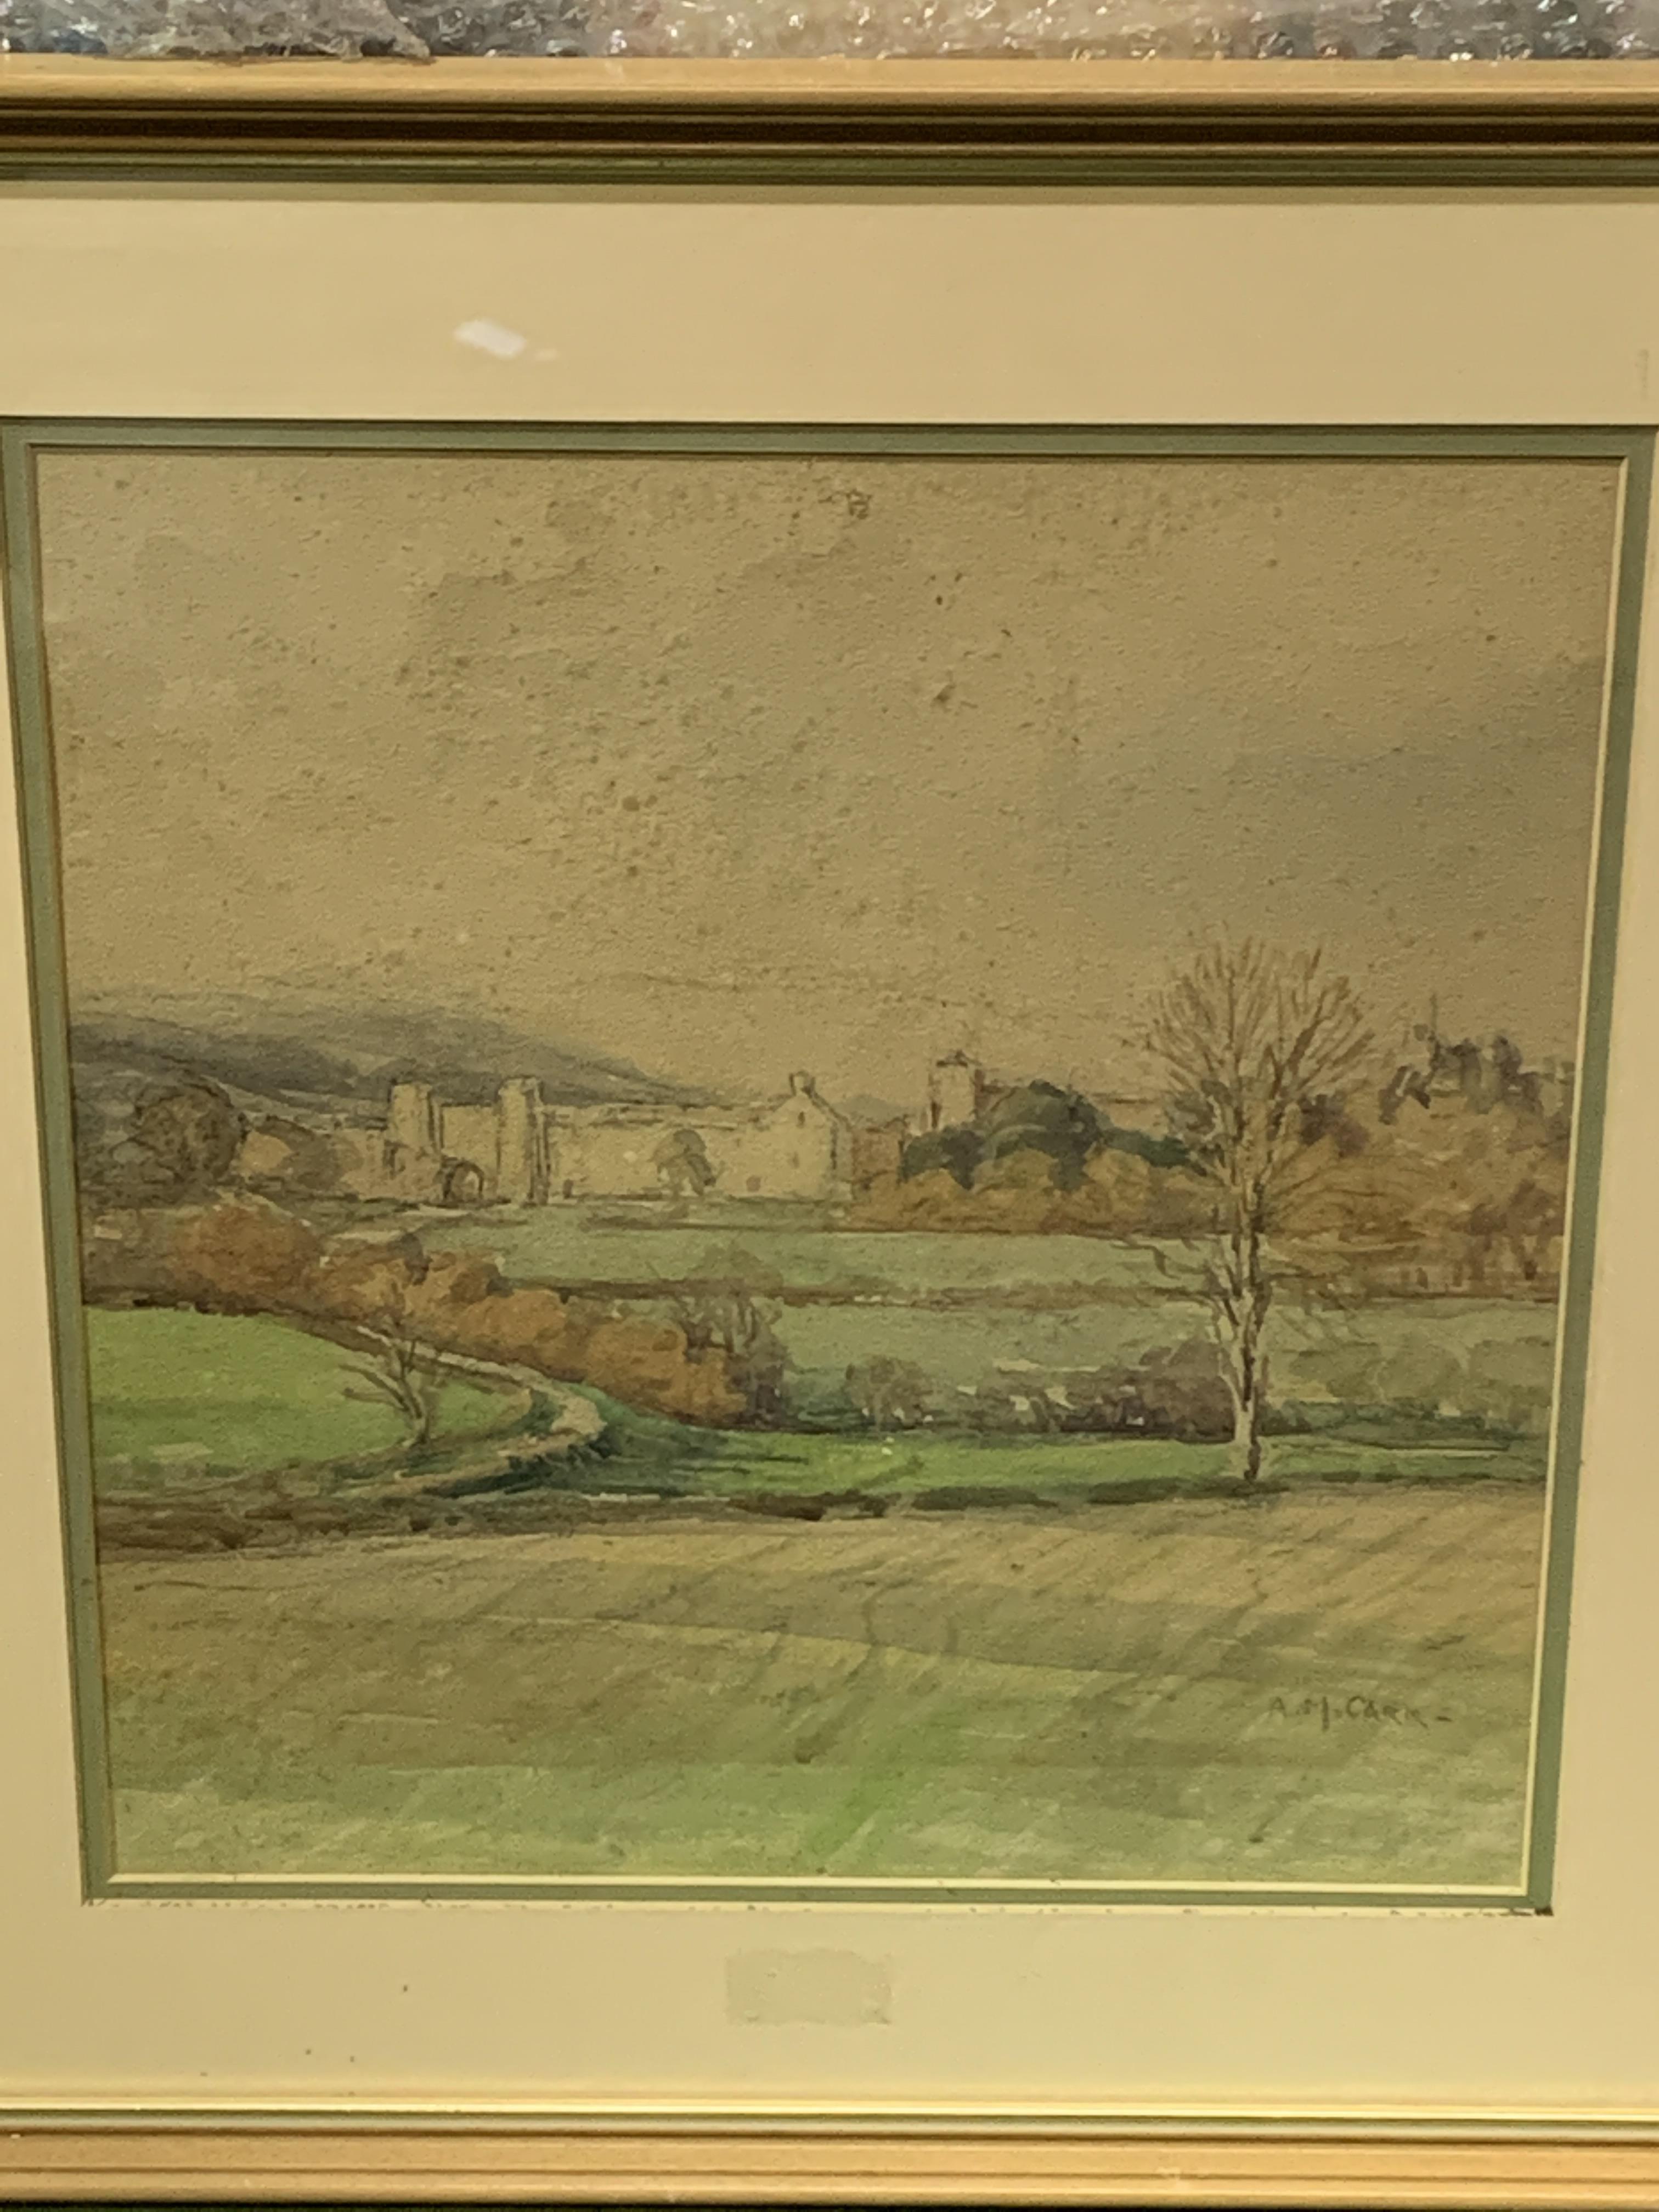 Two rural landscape watercolours by A.M. Carr and F.N. Colwell.